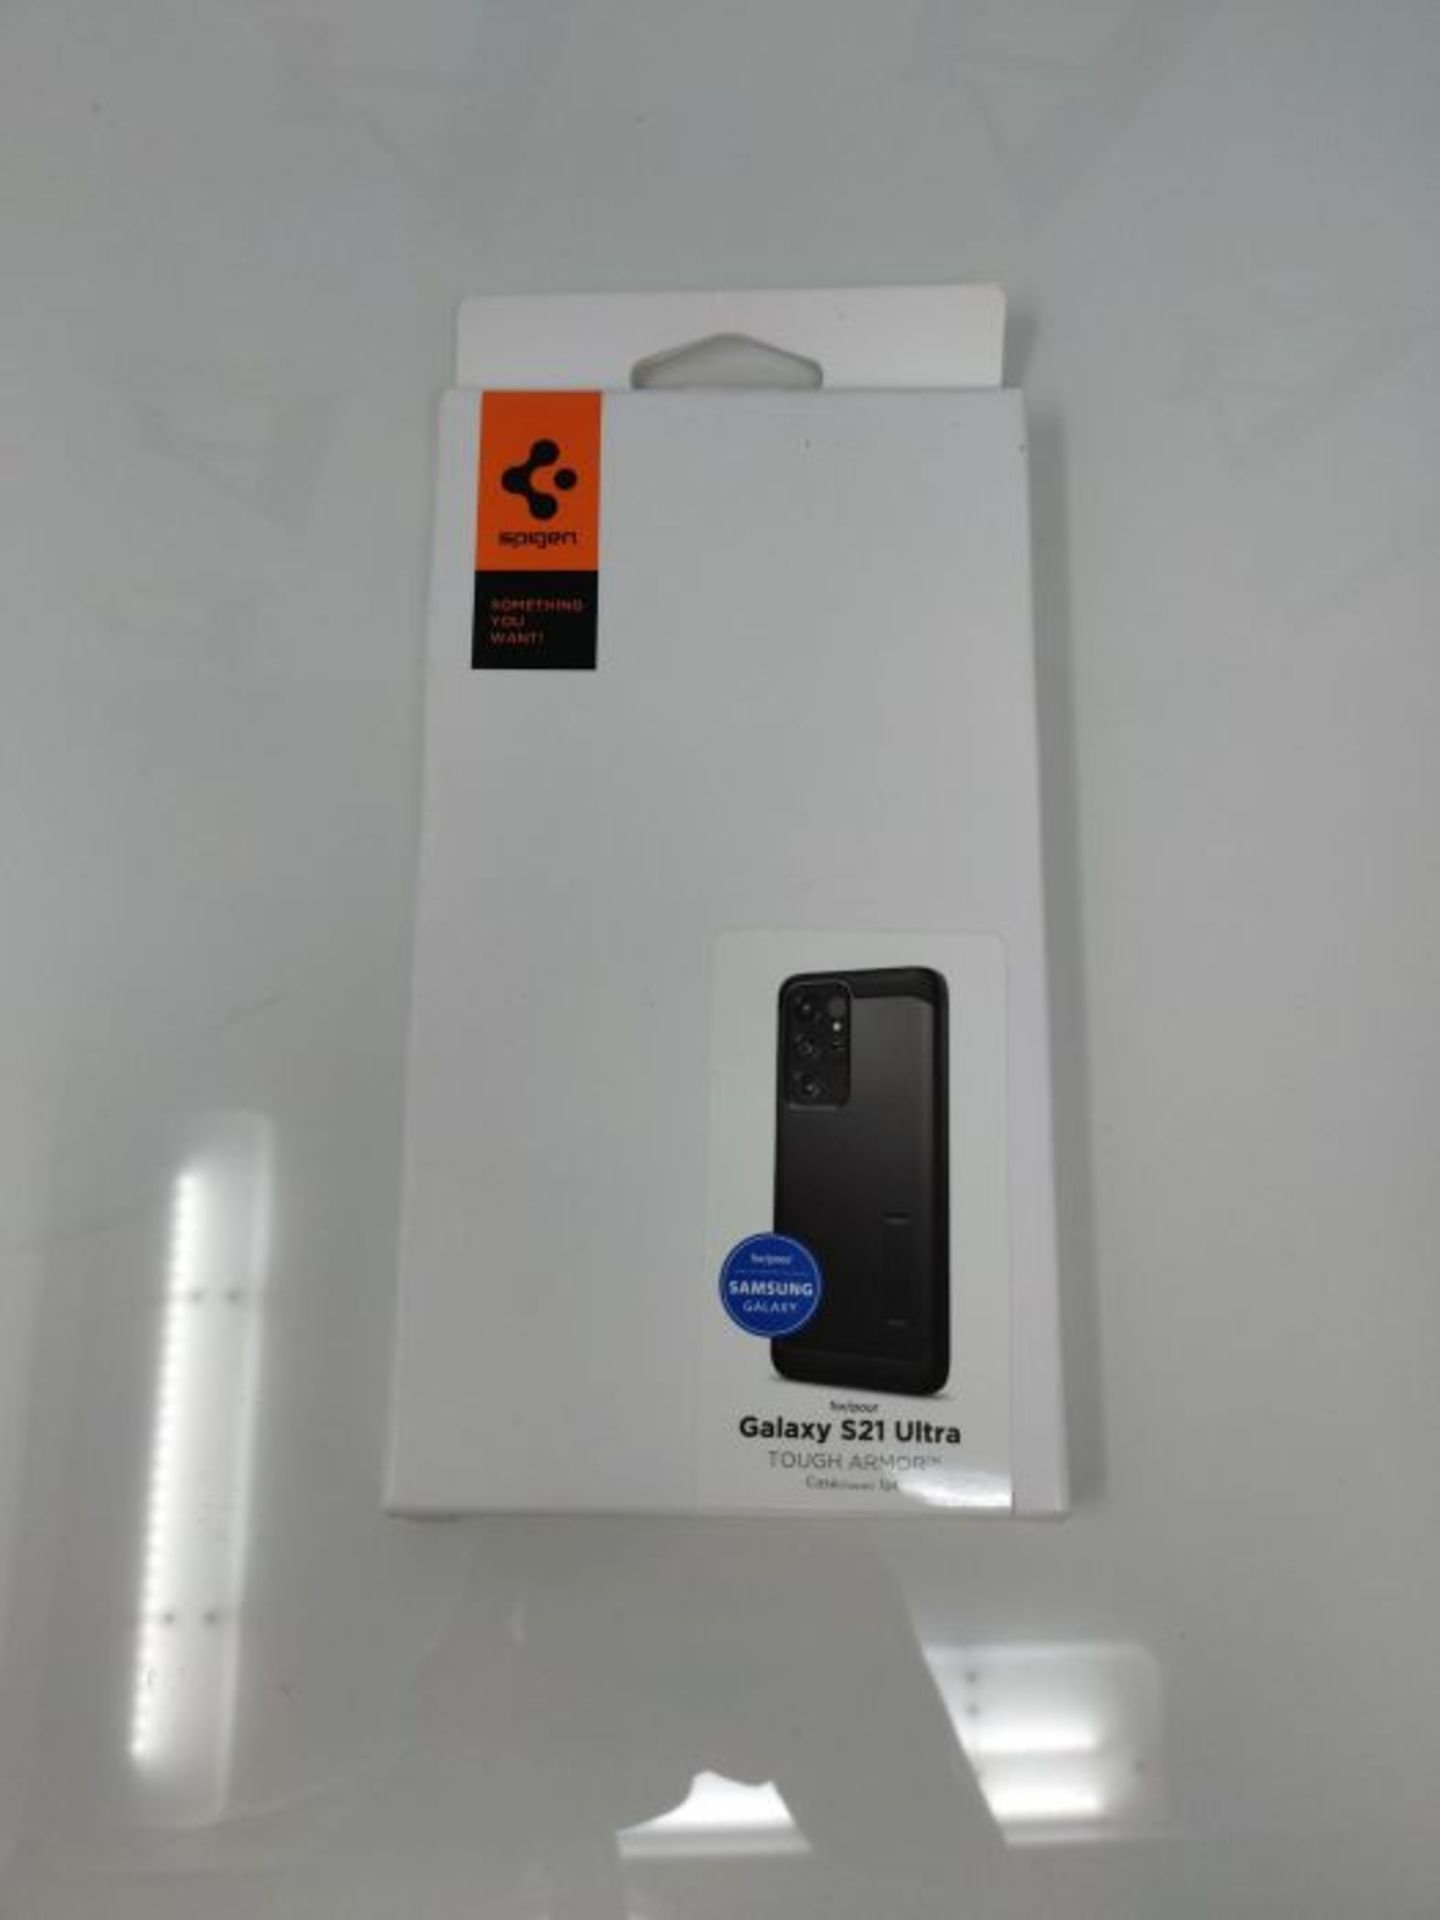 Spigen Tough Armor Case Compatible with Samsung Galaxy S21 Ultra - Black - Image 2 of 3